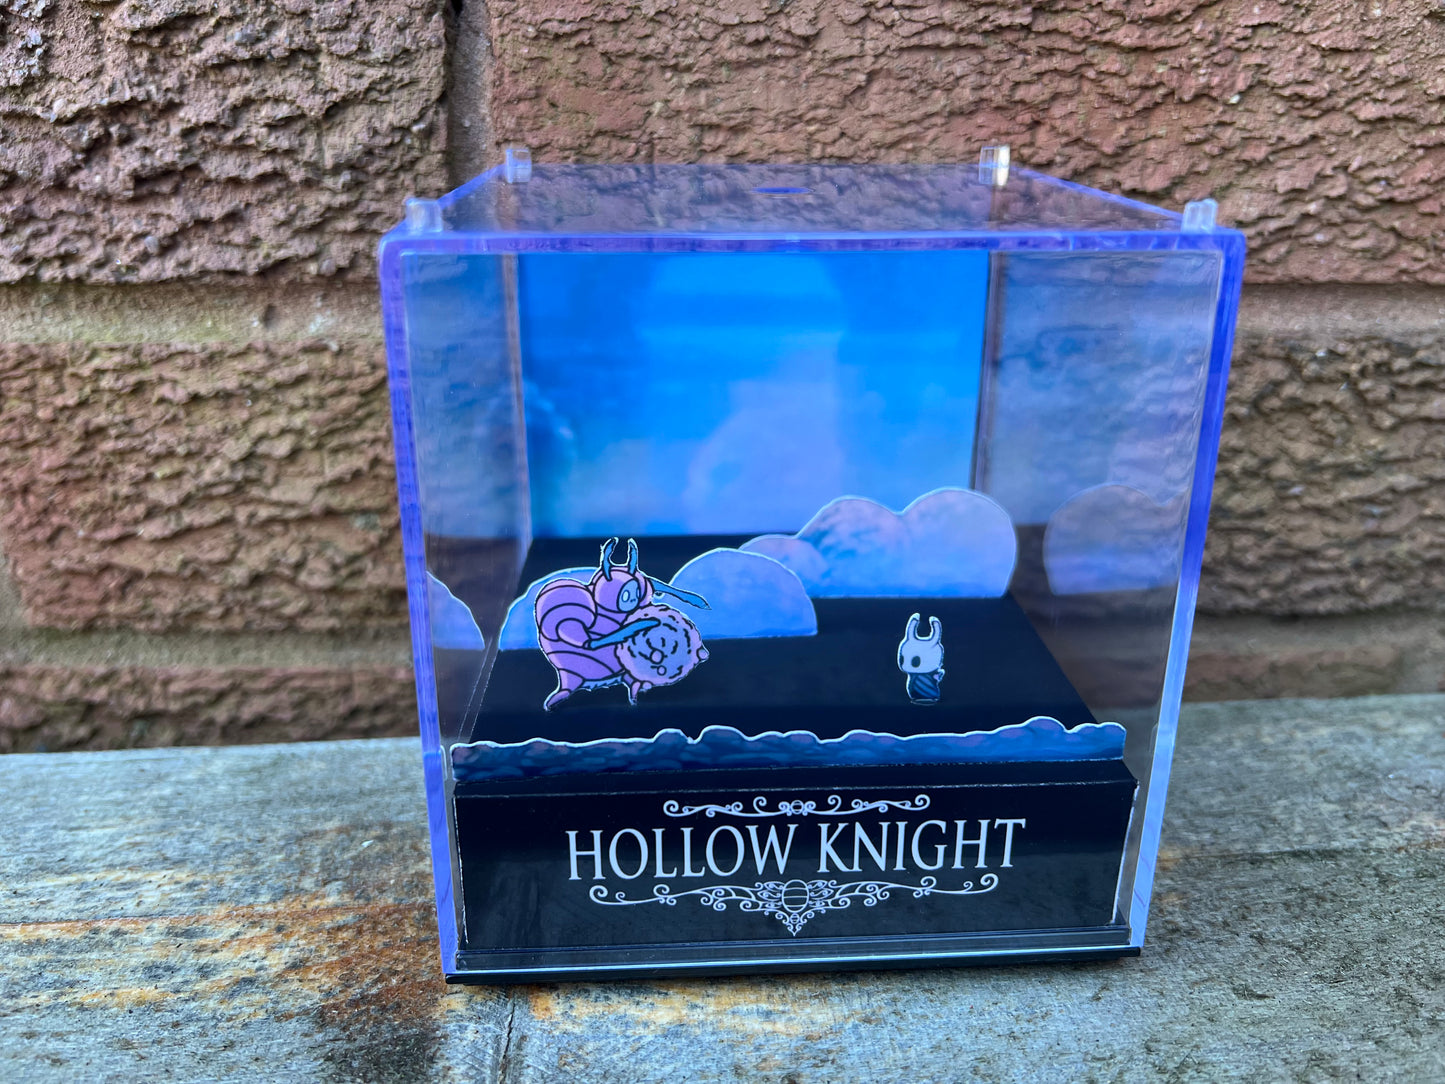 HOLLOW KNIGHT - Dung Defender - 3D Game Cube Diorama